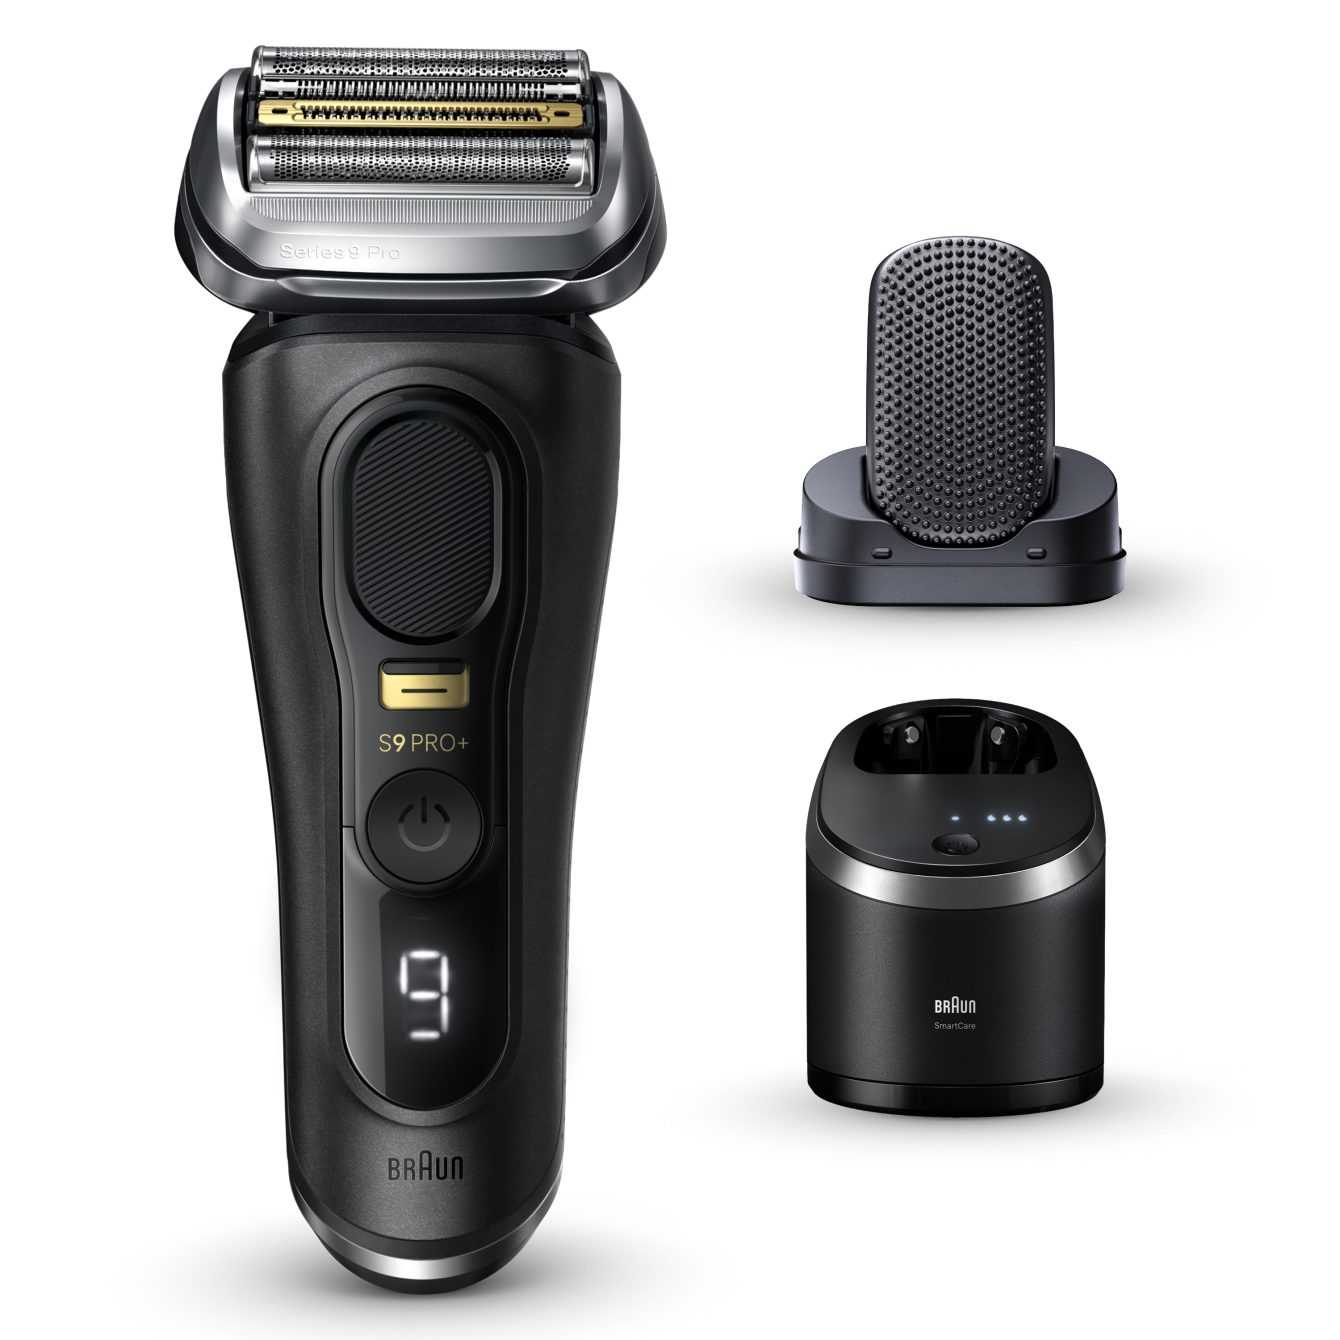 Braun celebrates World Beard Day with 5 tips from grooming expert Andrea Discanni